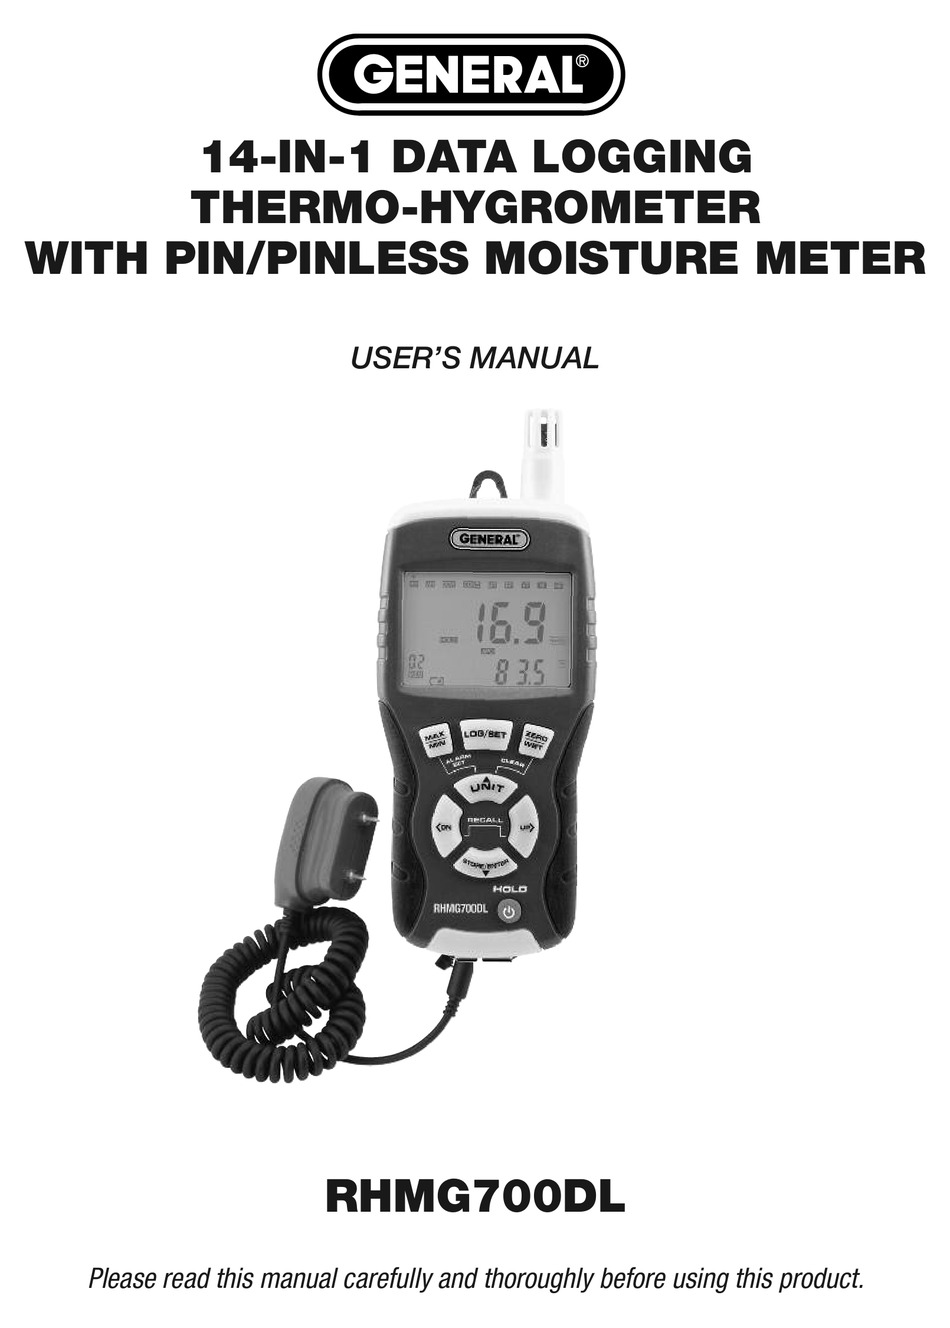 General Tools 9-in-1 Thermo-Hygrometer Pin/Pinless Moisture Meter